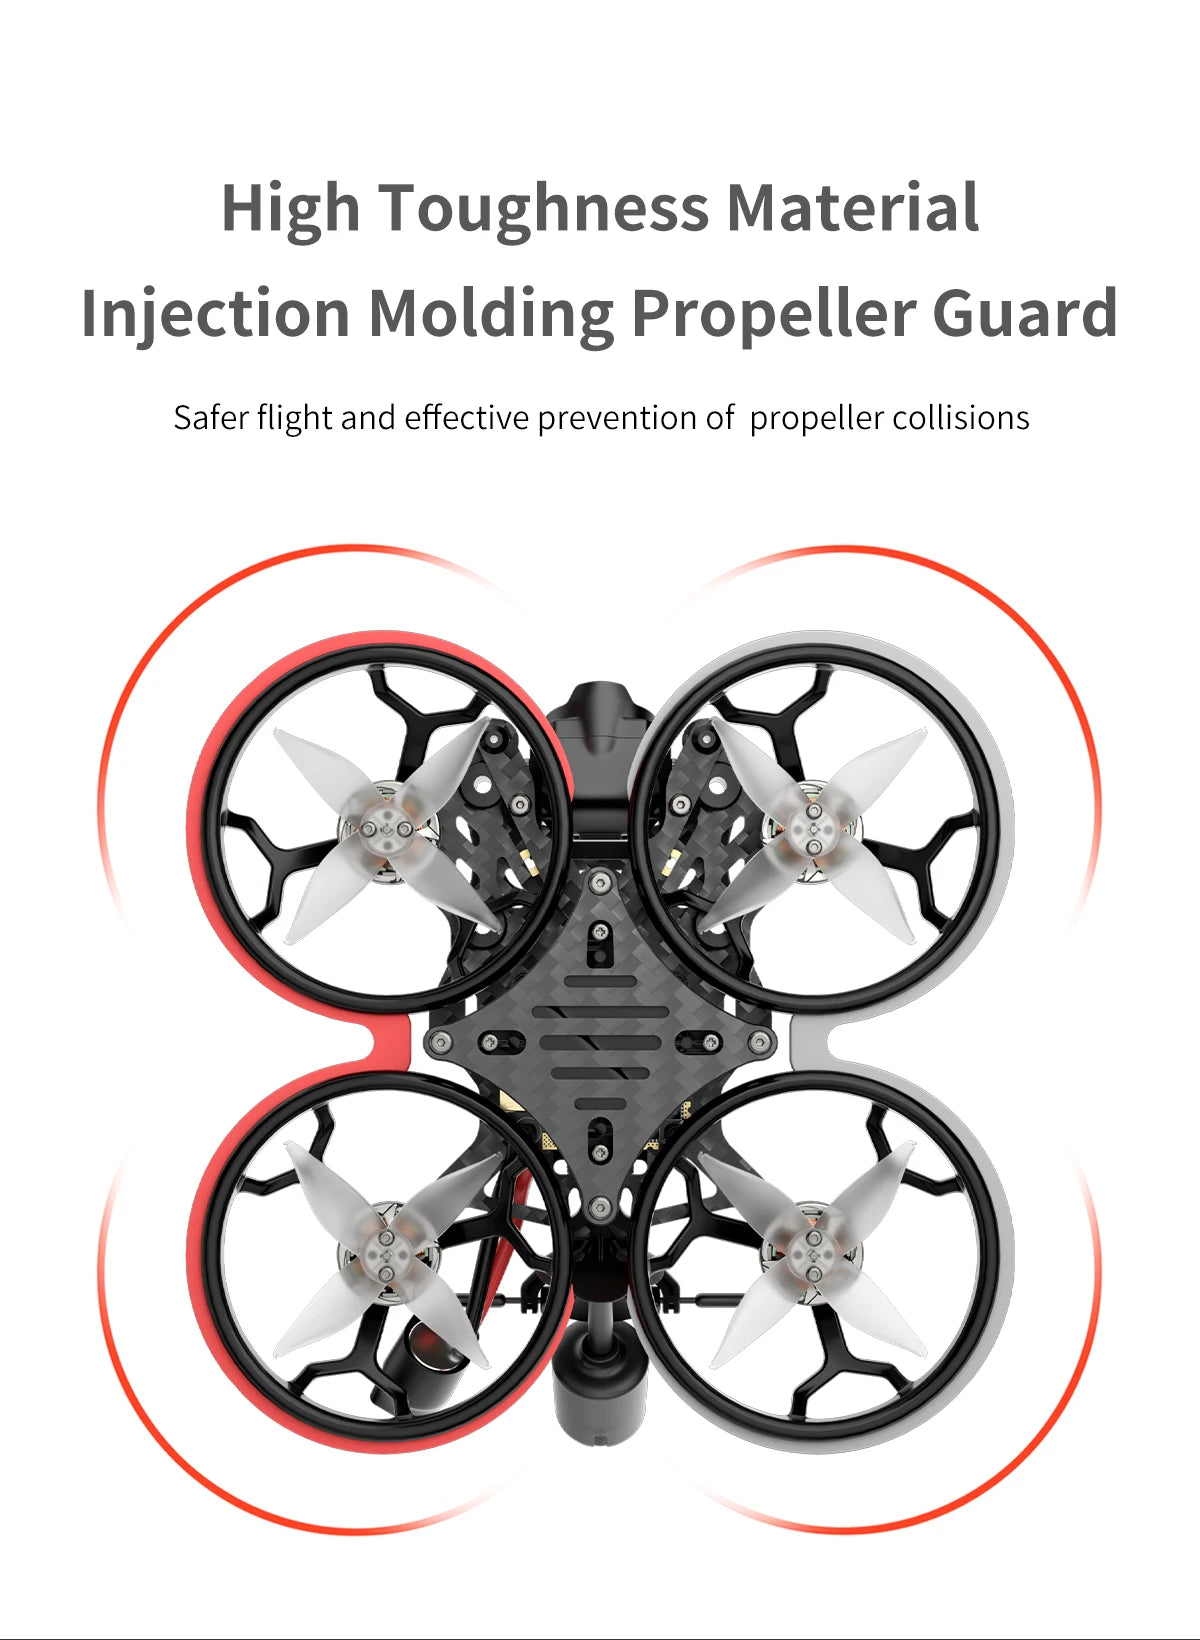 GEPRC Cinelog20 HD Wasp FPV Drone, High Toughness Material Injection Molding Propeller Guard Safer flight and effective prevention of